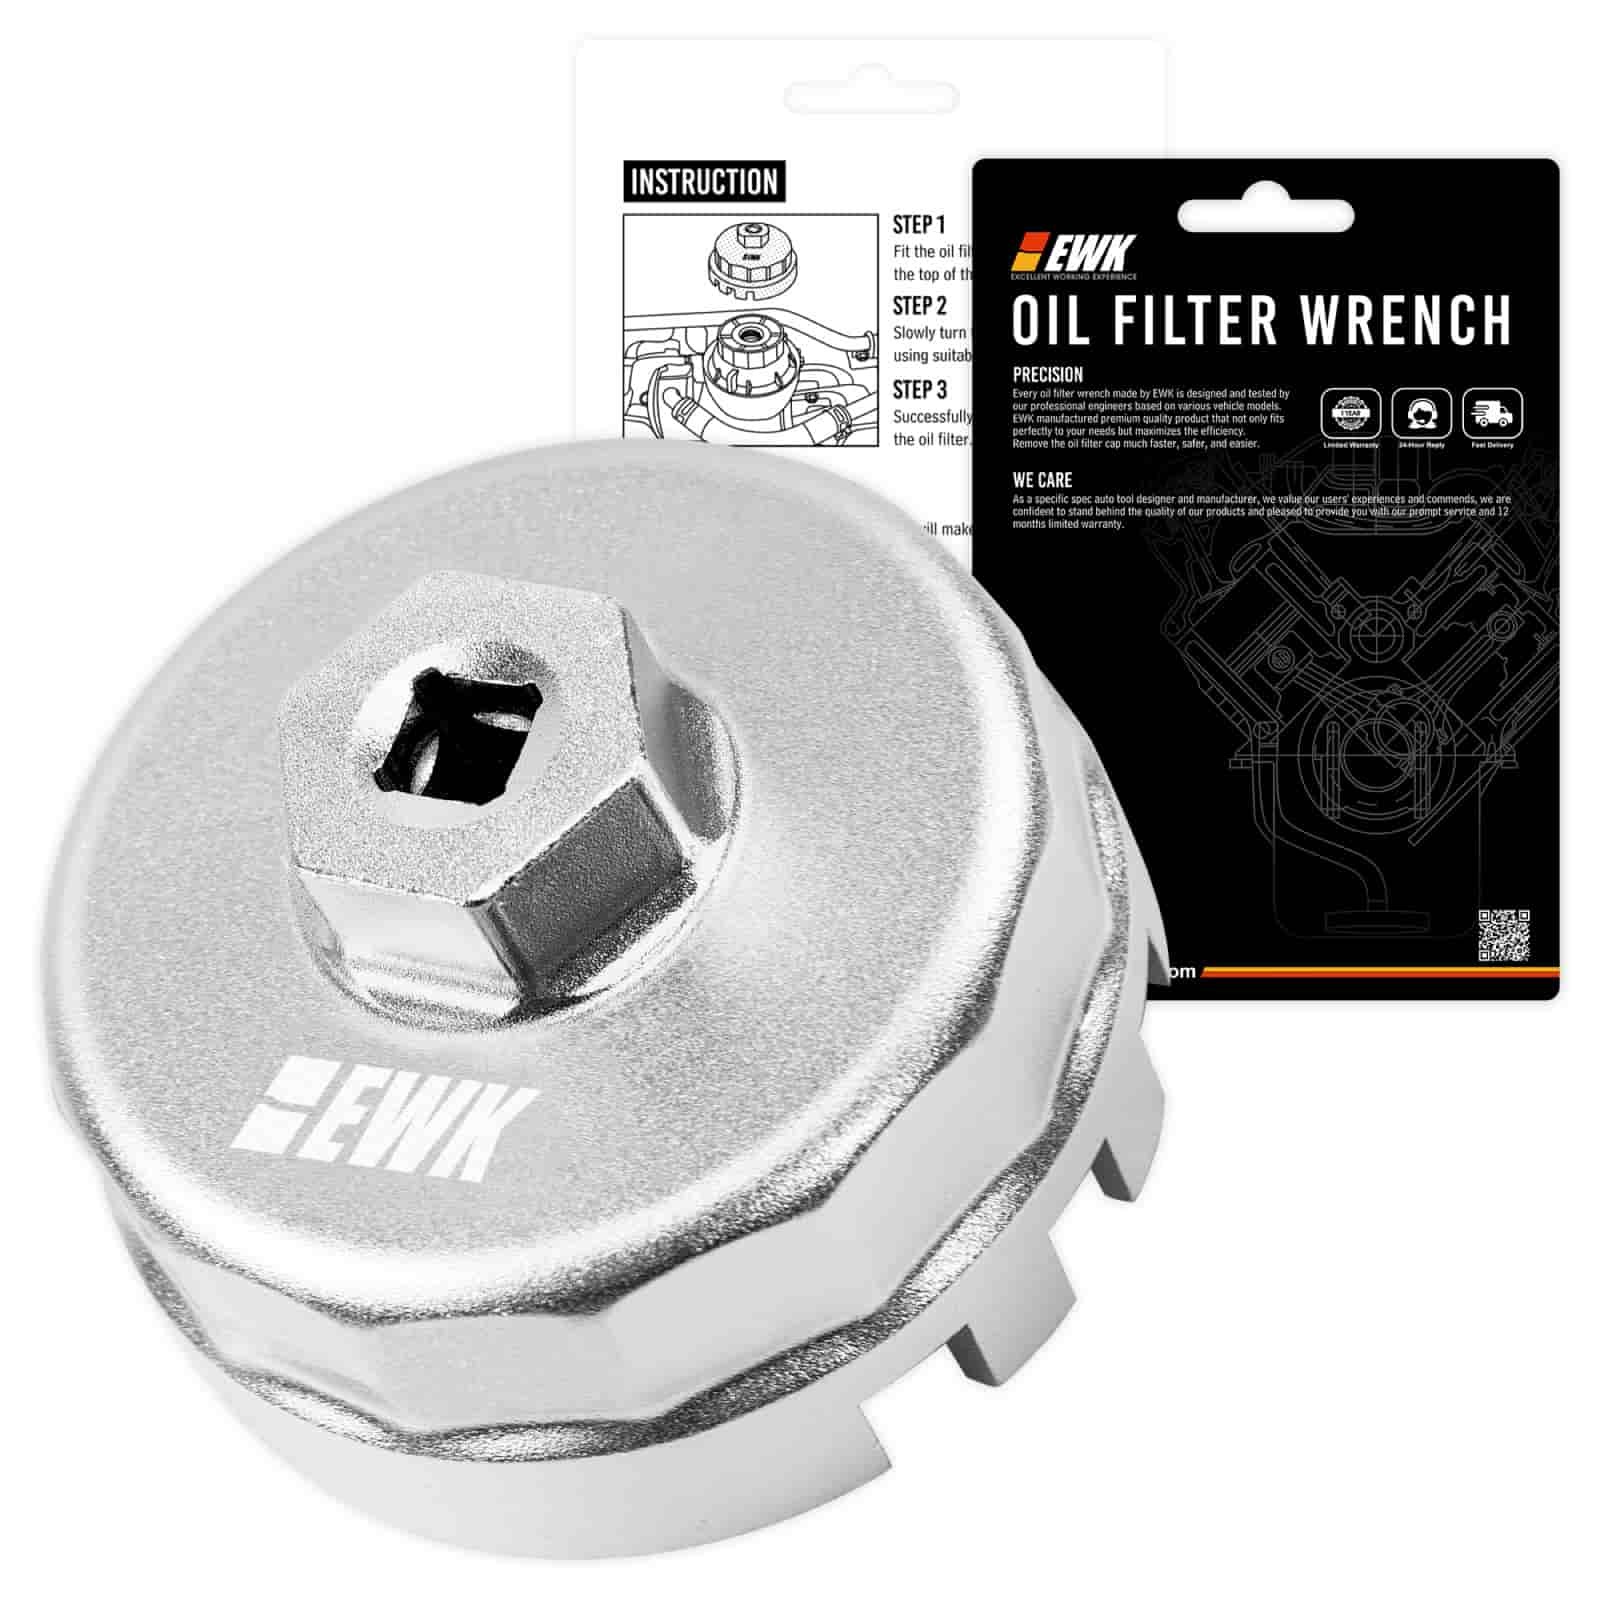 MX2320 Toyota Oil Filter Wrench - Fits Toyota, Lexus and Scion